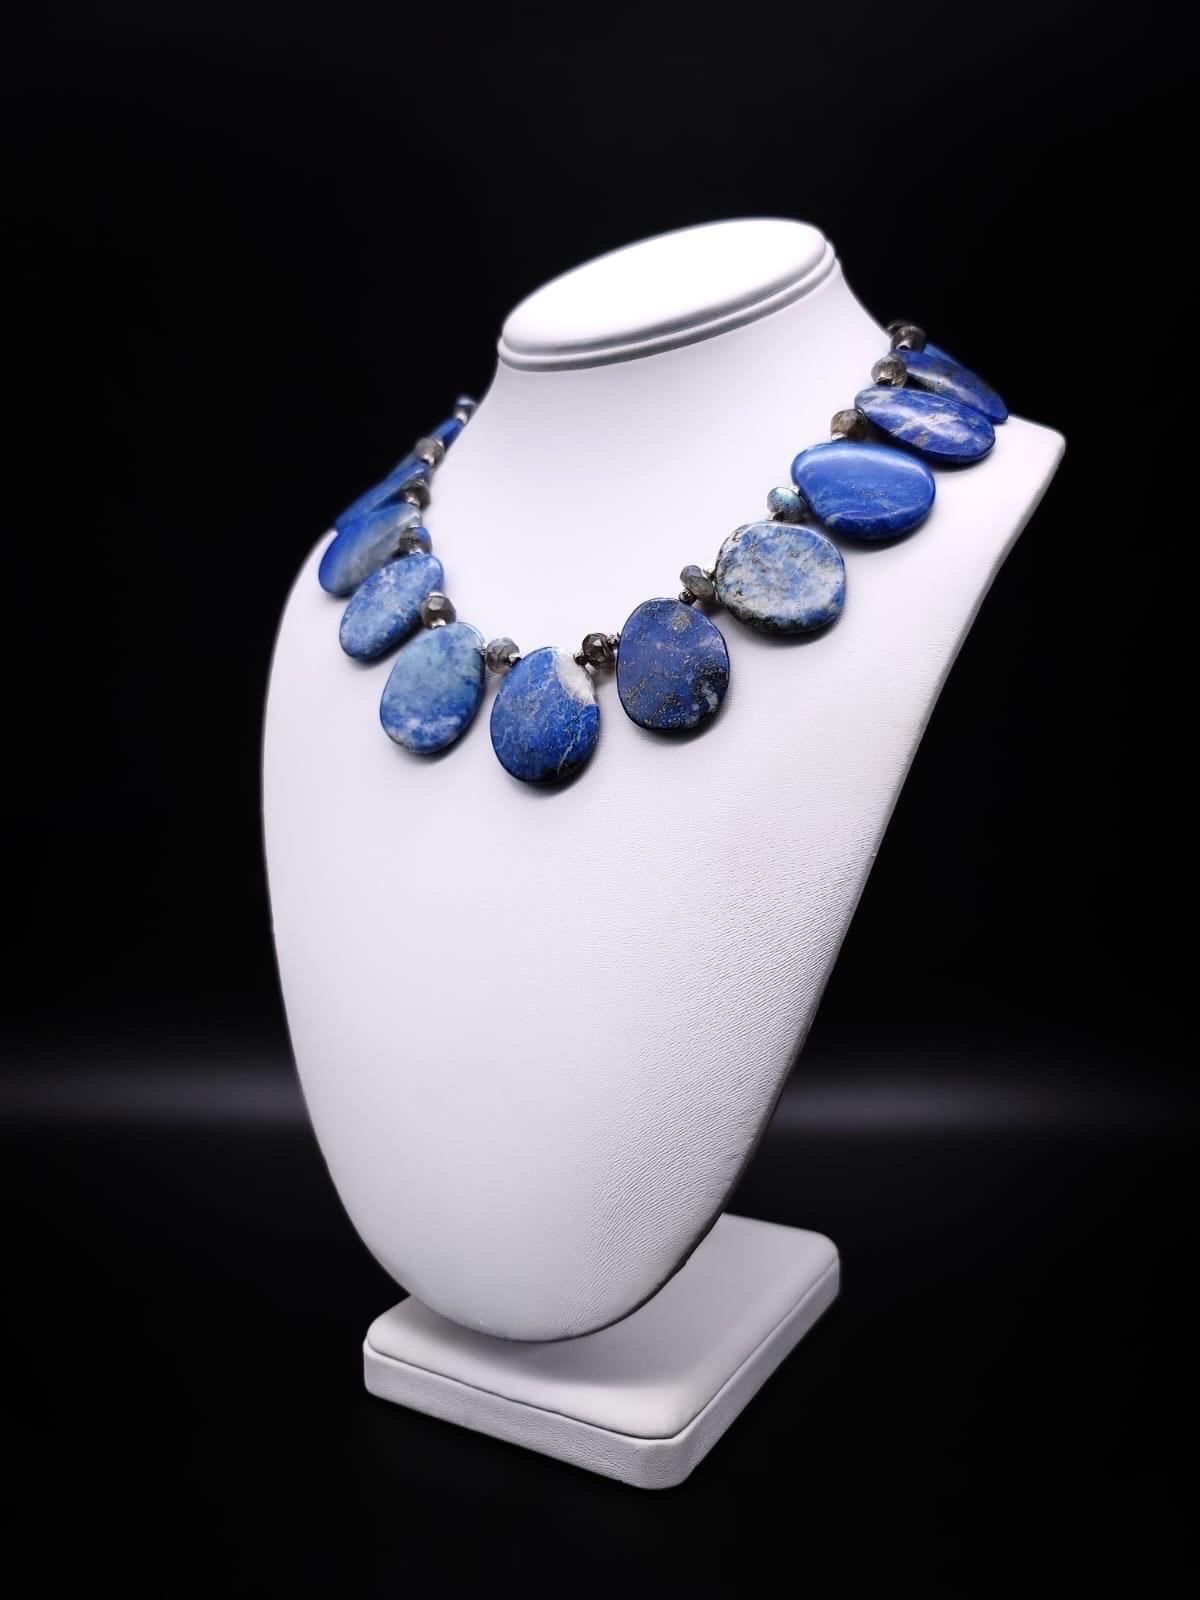 One-of-a-Kind

Indulge in the timeless elegance of the Lapis Lazuli stone with this stunning collar necklace. The mottled Lapis plates are polished to perfection, showcasing a beautiful array of gray shades within the stone. The faceted Labradorite